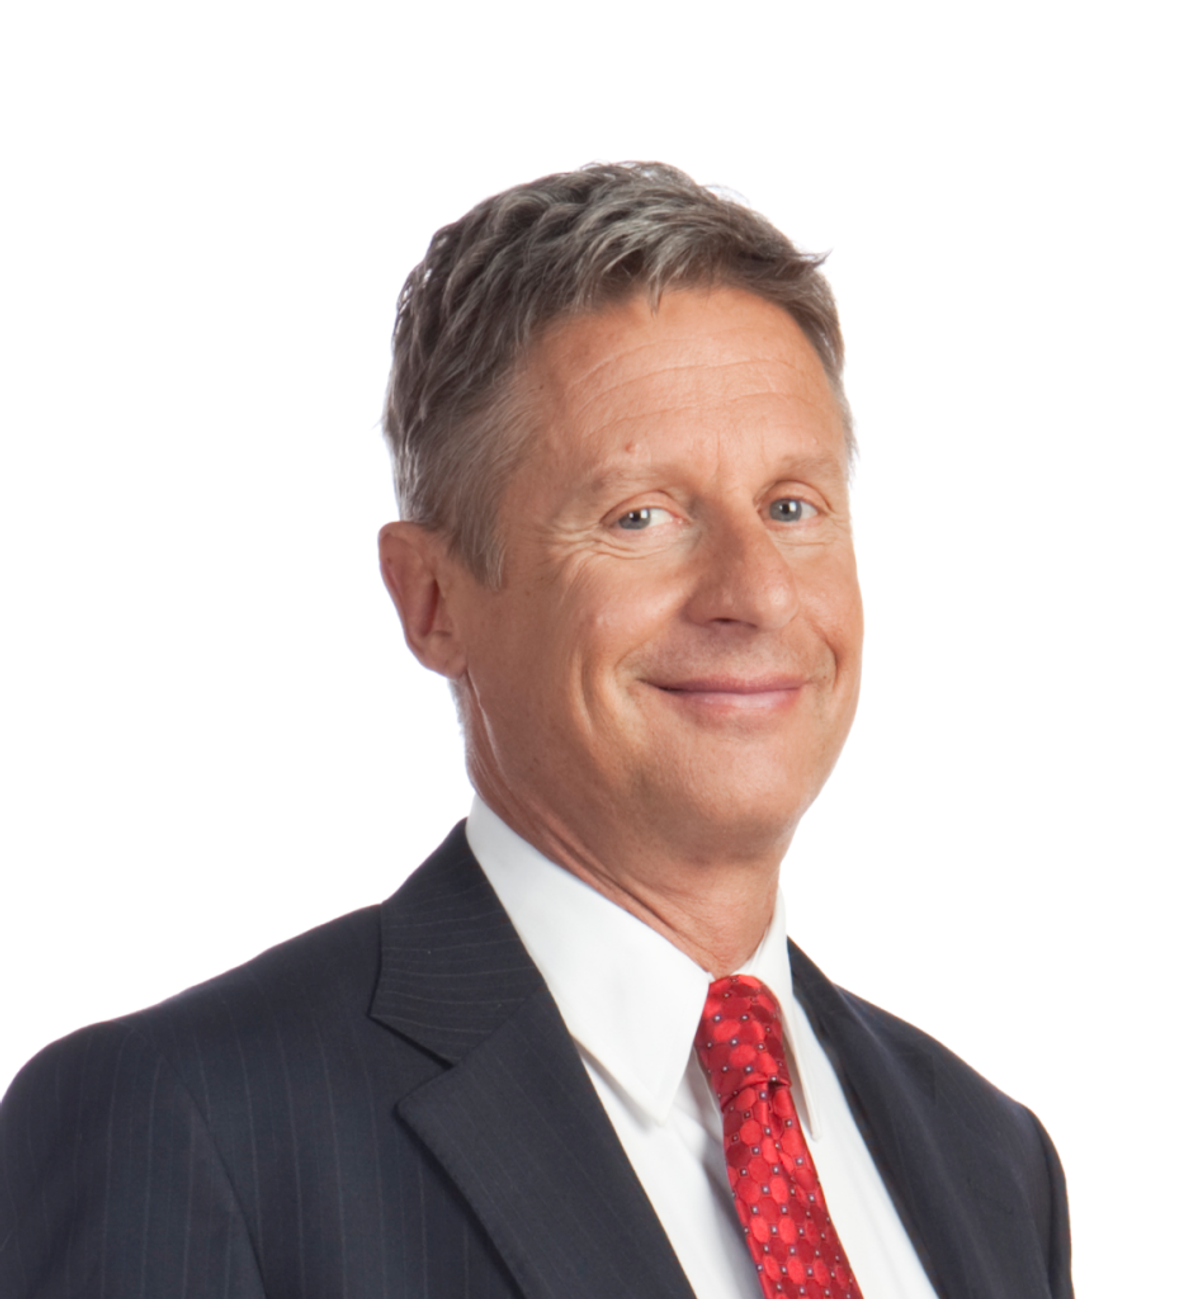 Meet Gary Johnson: America's Only Hope For Salvation